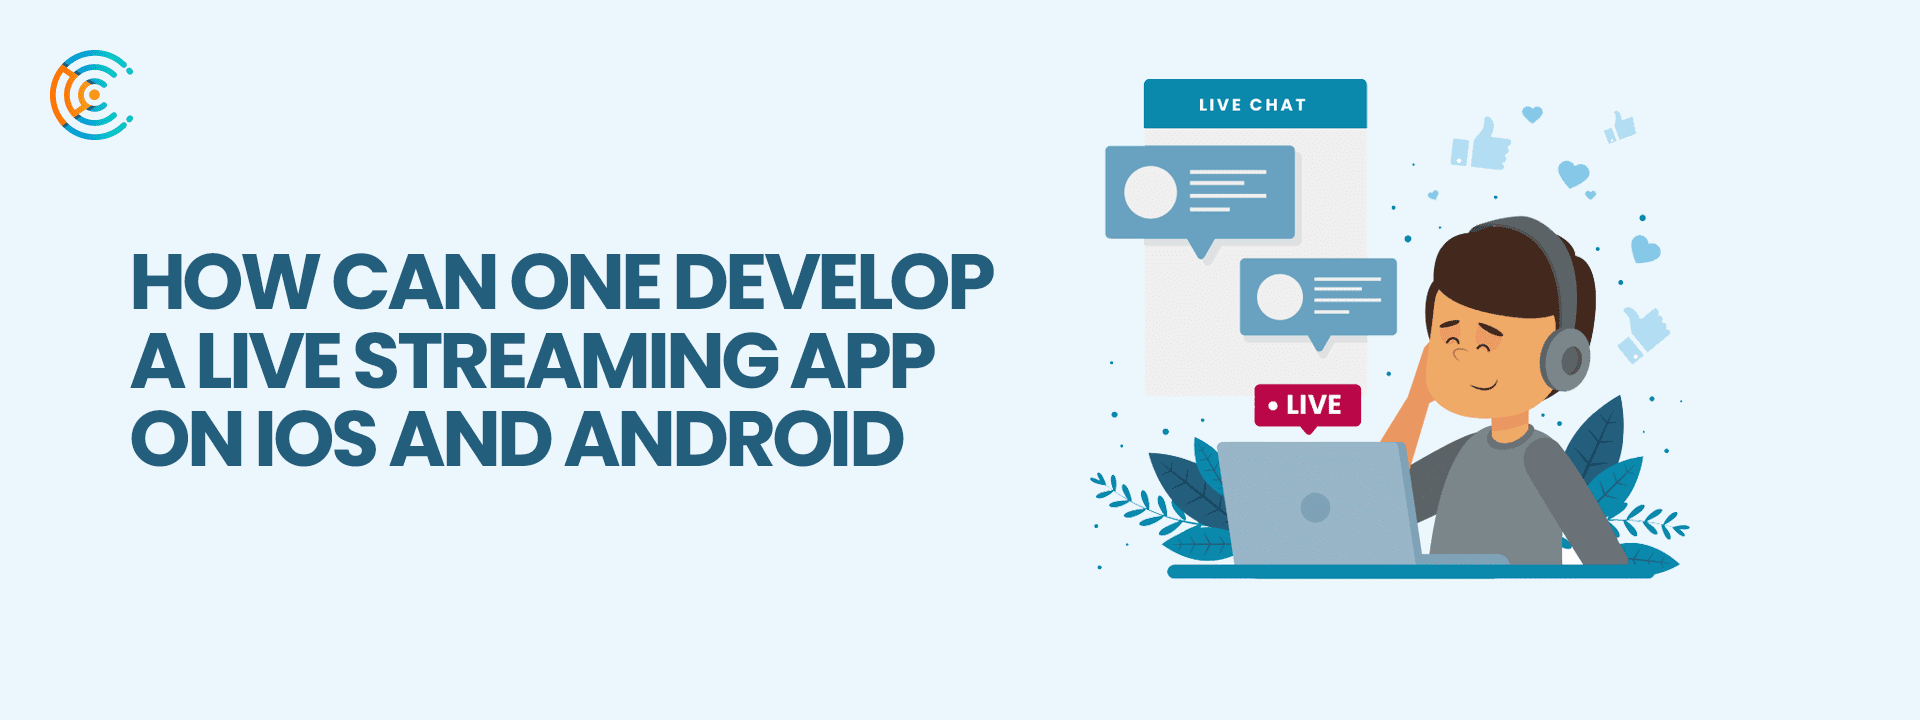 Develop A Live Streaming App On iOS and Android